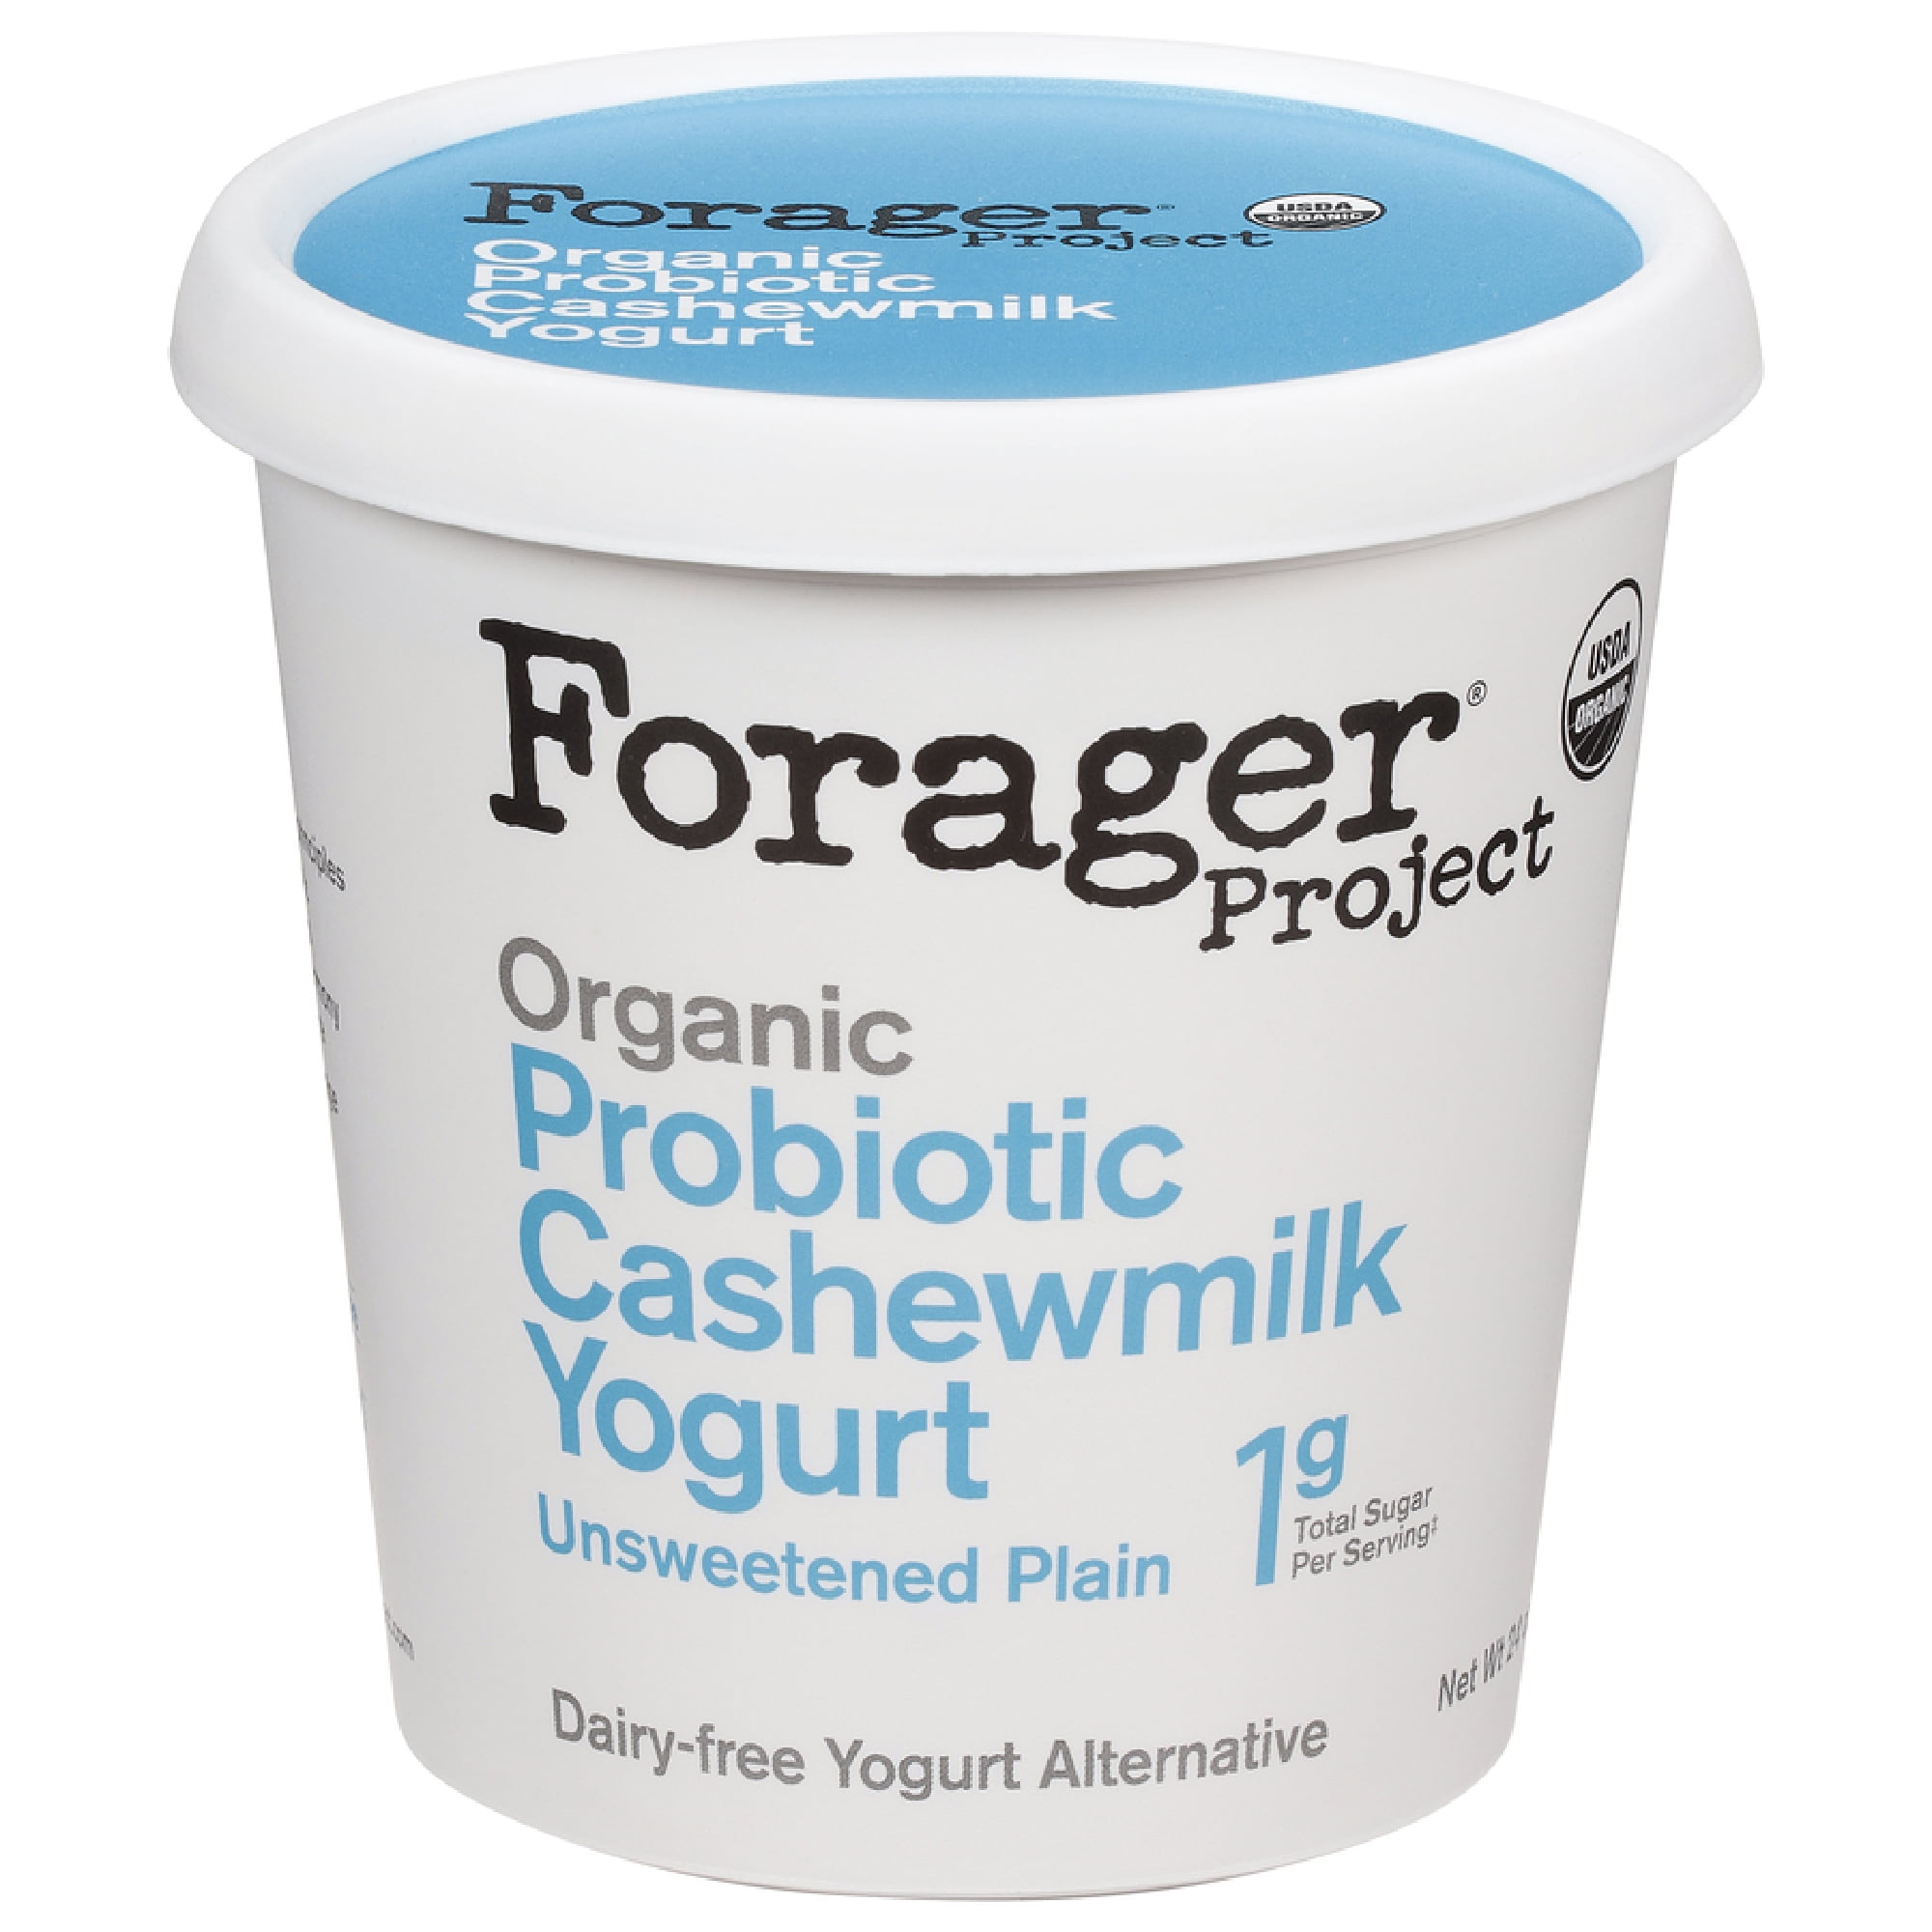 Forager Project Dairy-Free Sour Cream Review & Info (Vegan)